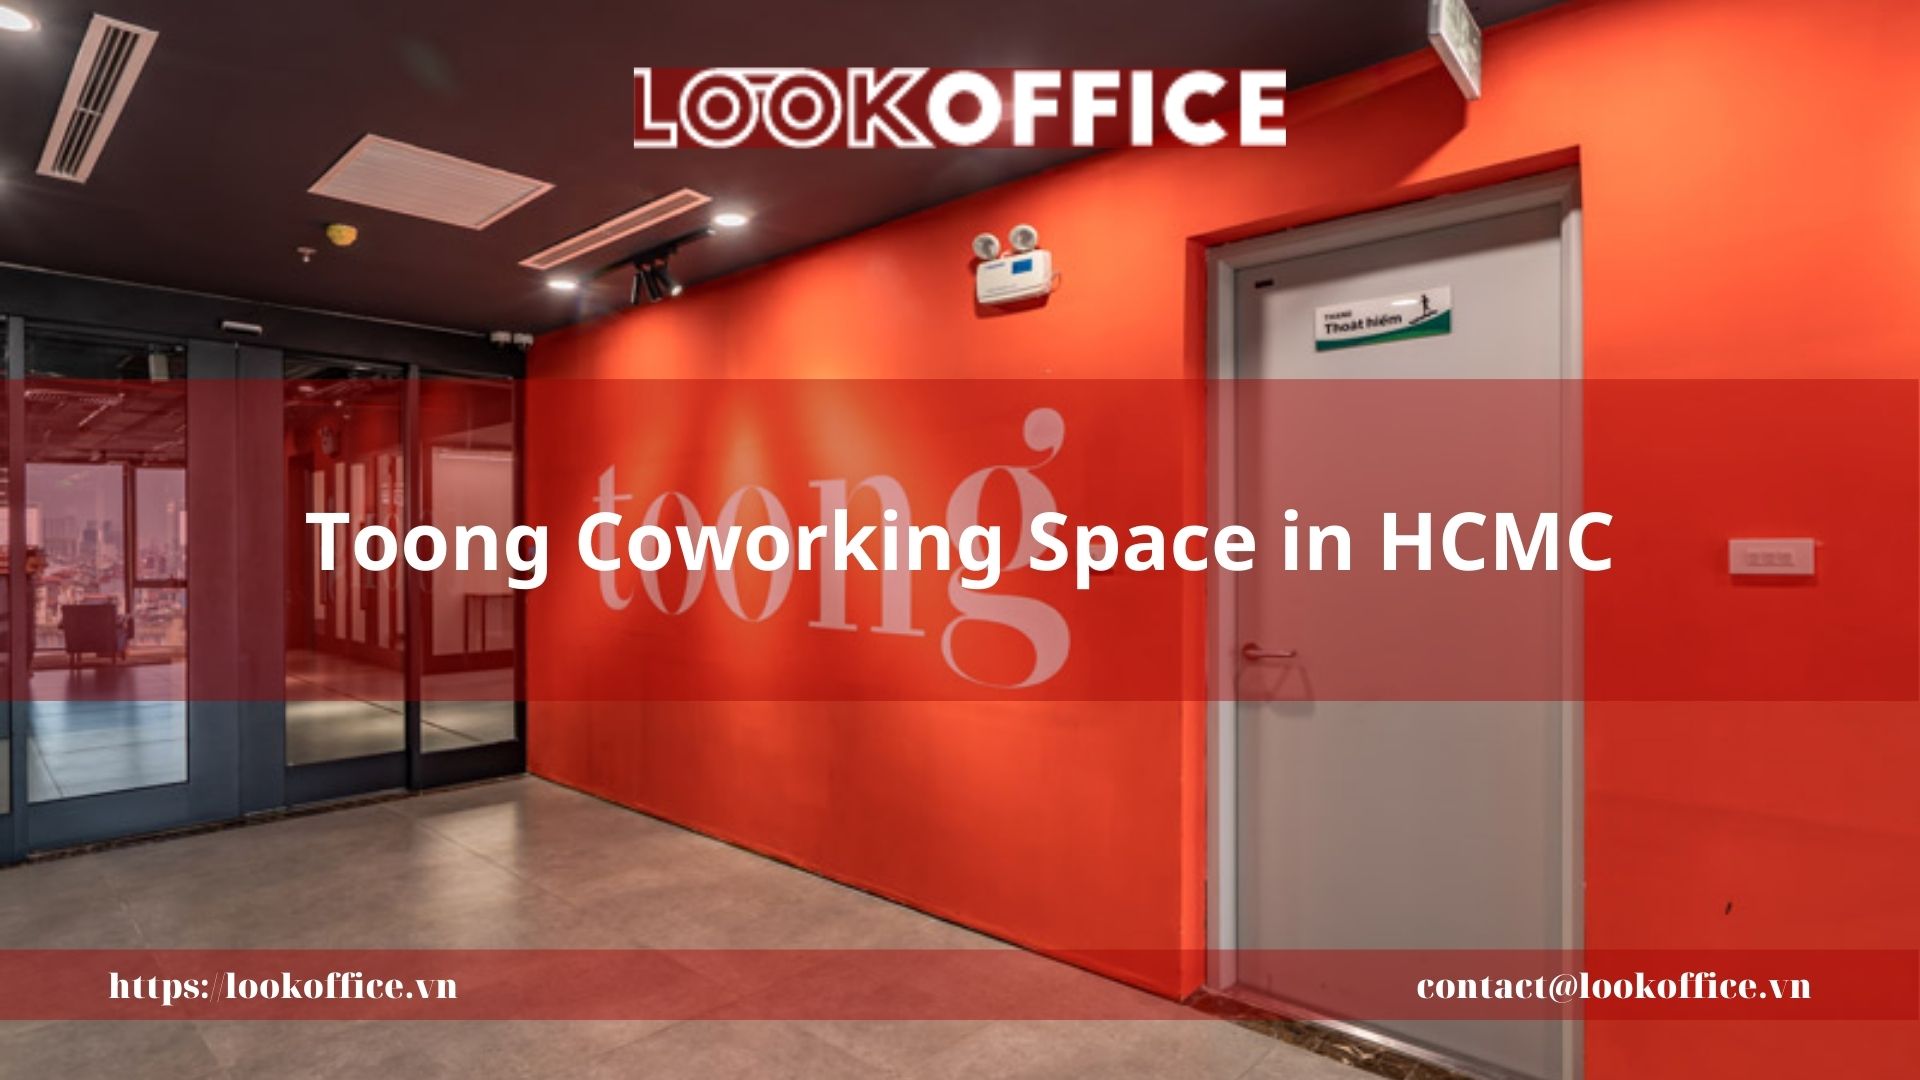 Toong Coworking Space in HCMC